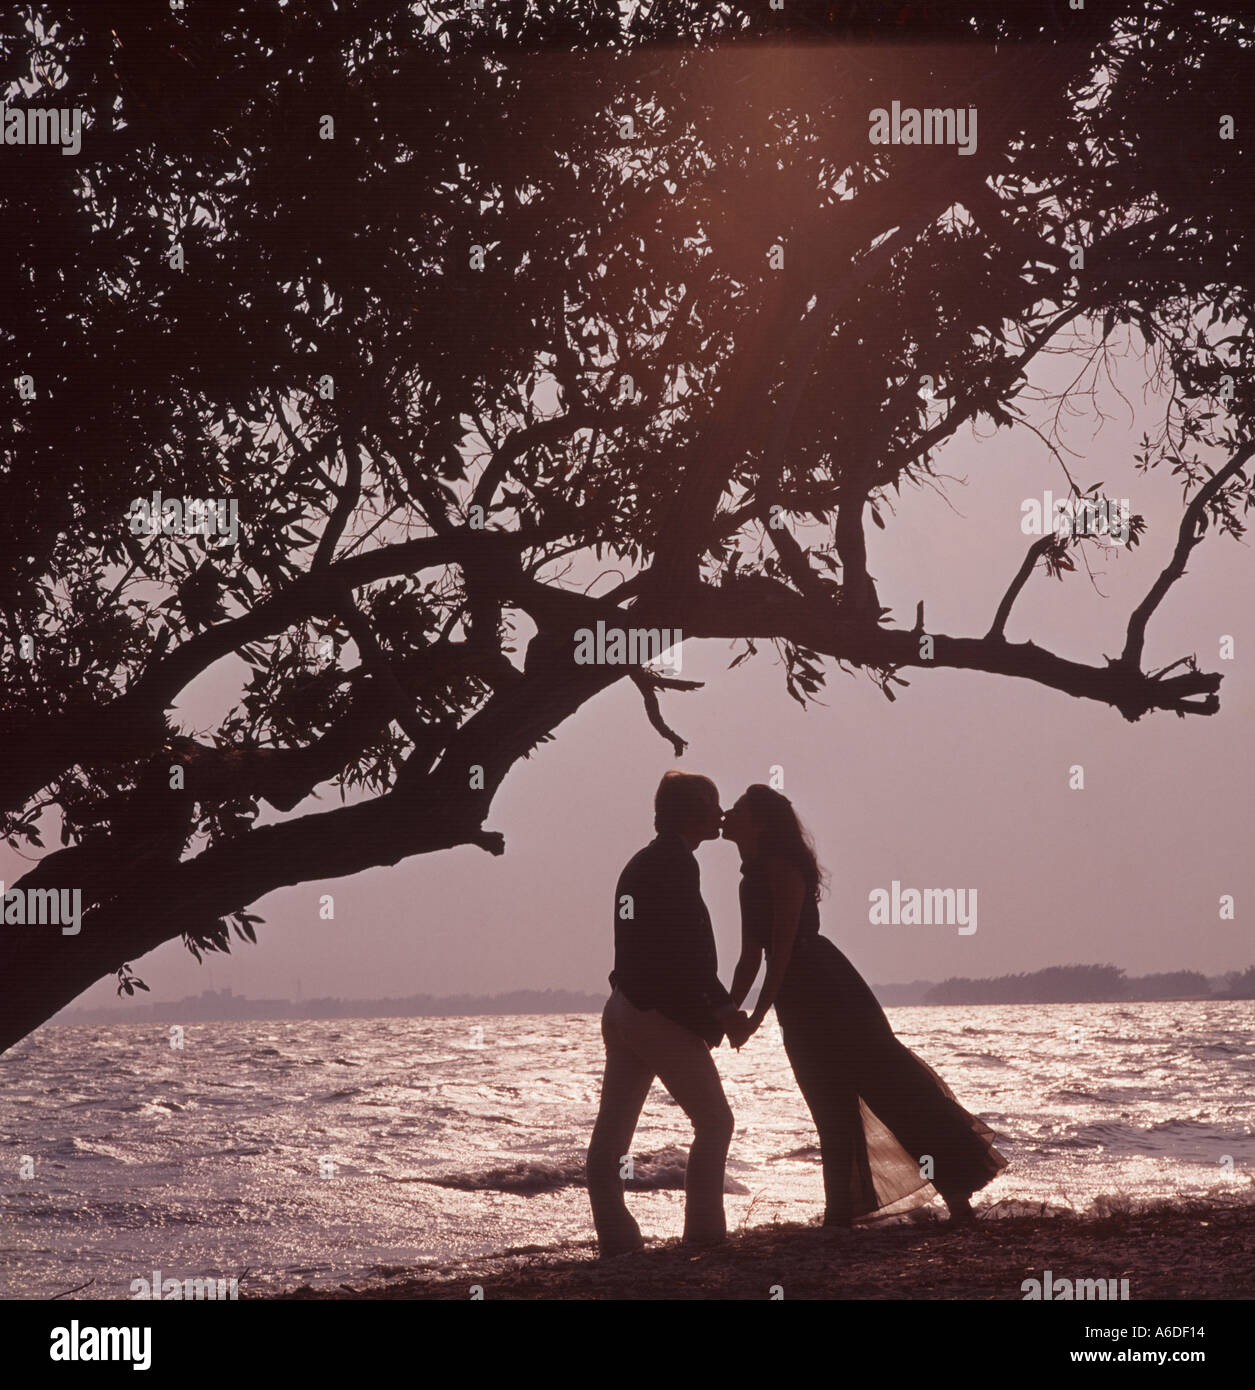 Couple Kissing In The Moonlight At The Beach Stock Photo Alamy